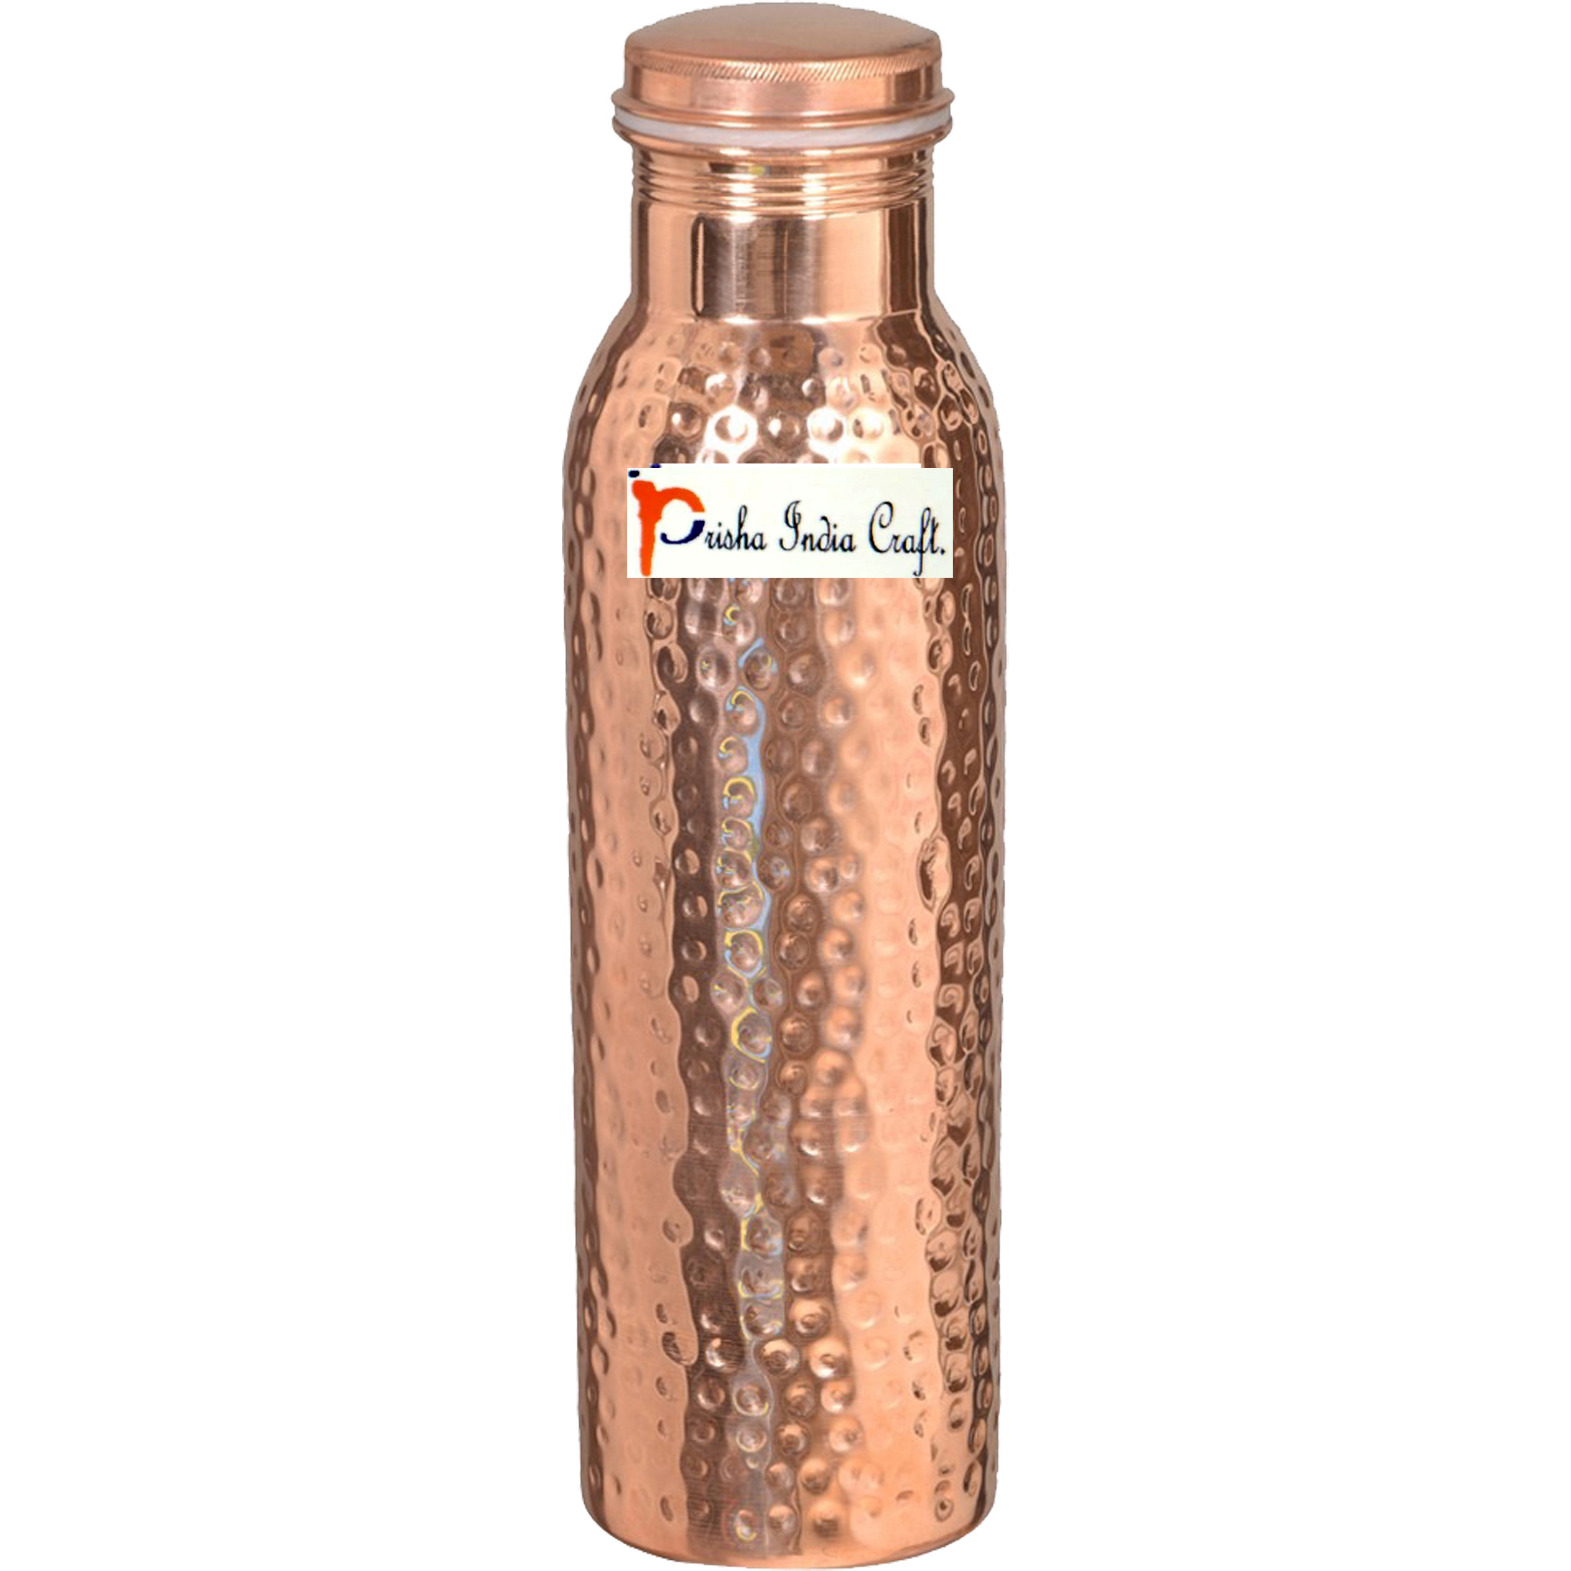 600ML / 20.28oz - Prisha India Craft B. - Pure Copper Water Bottle for Health Benefits | Joint Free, Best Quality Water Bottle - Handmade Christmas Gift Item - FREE BOTTLE CLEANING BRUSH